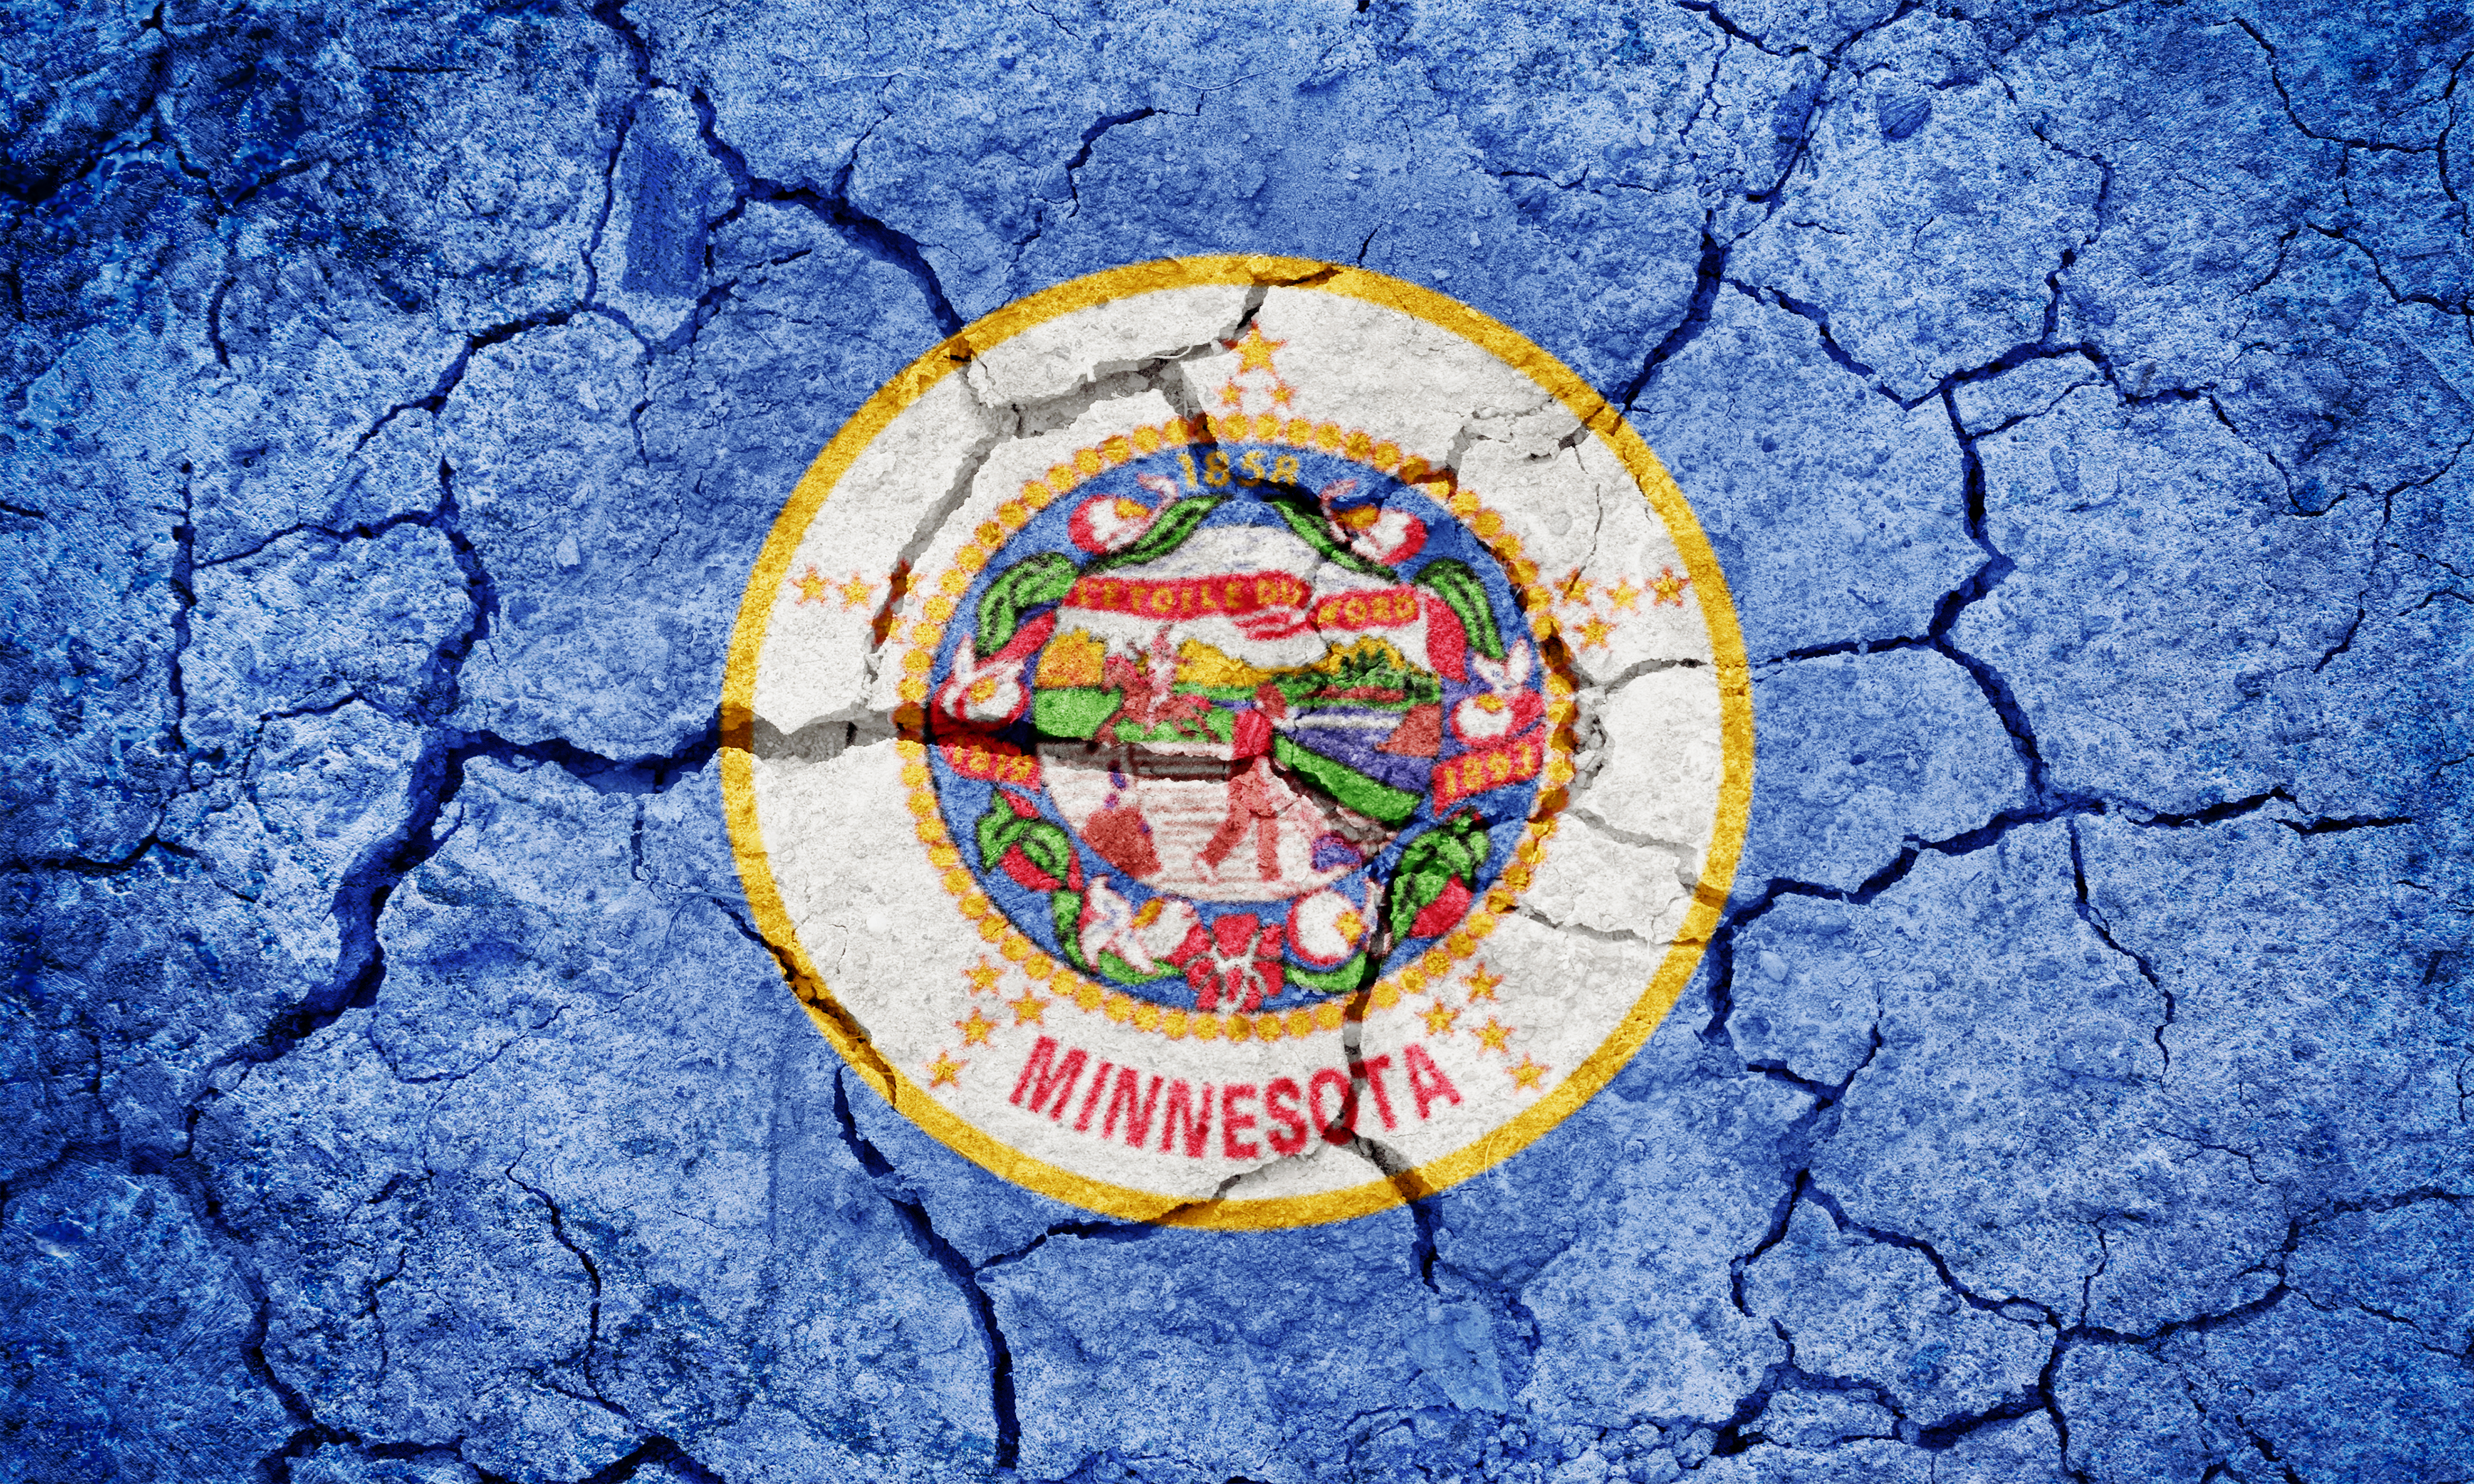 Susie Jones Reports: Minnesota DRN Climatologist Pete Boulay on the drought